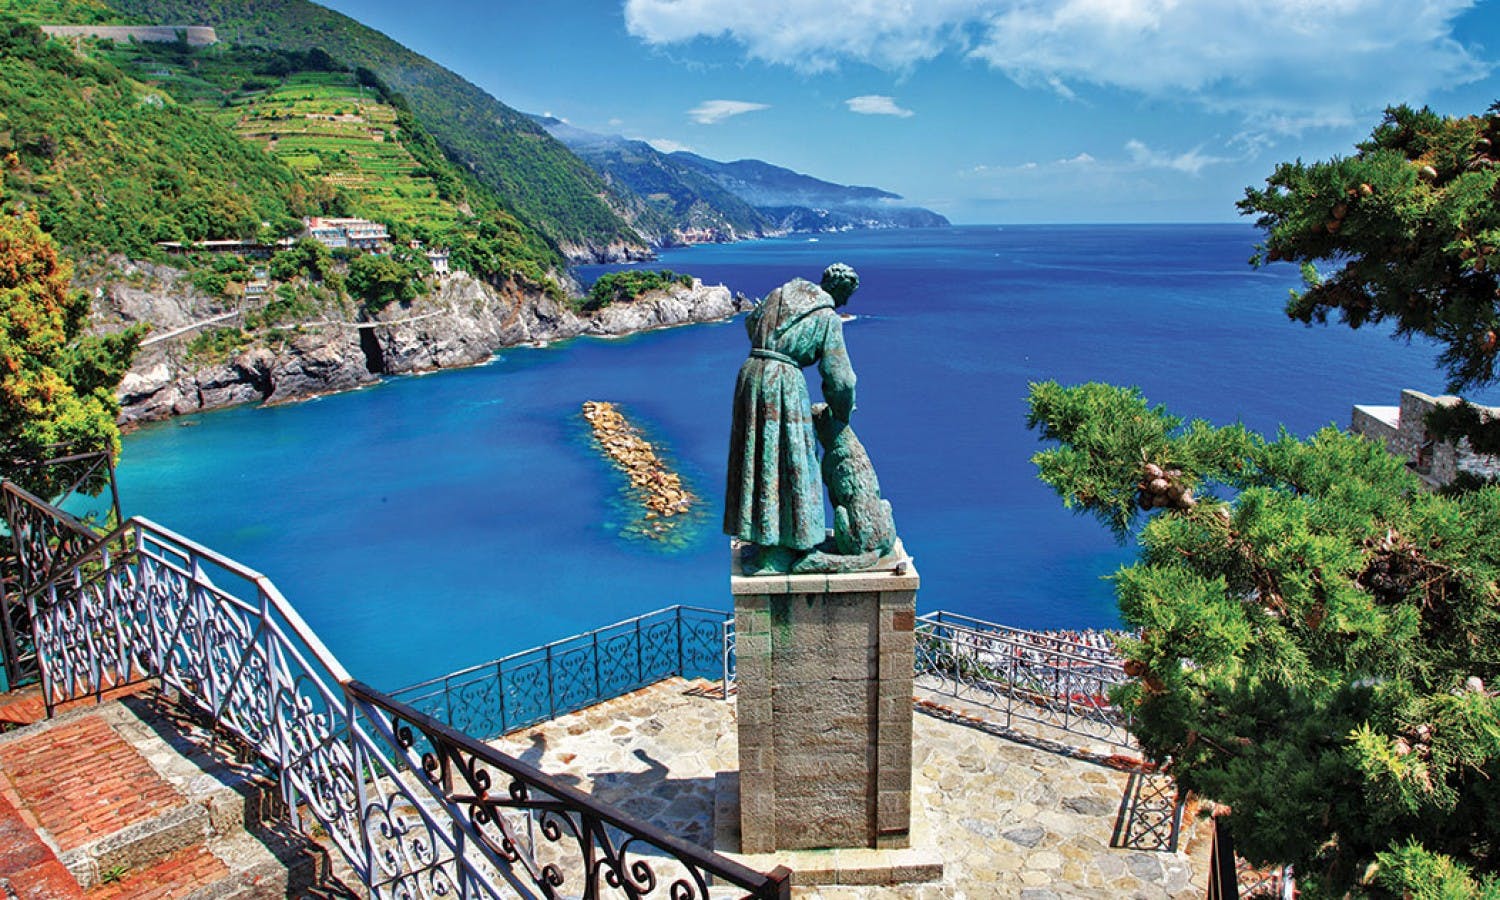 Cinque Terre Day Tour with Limoncino Tasting